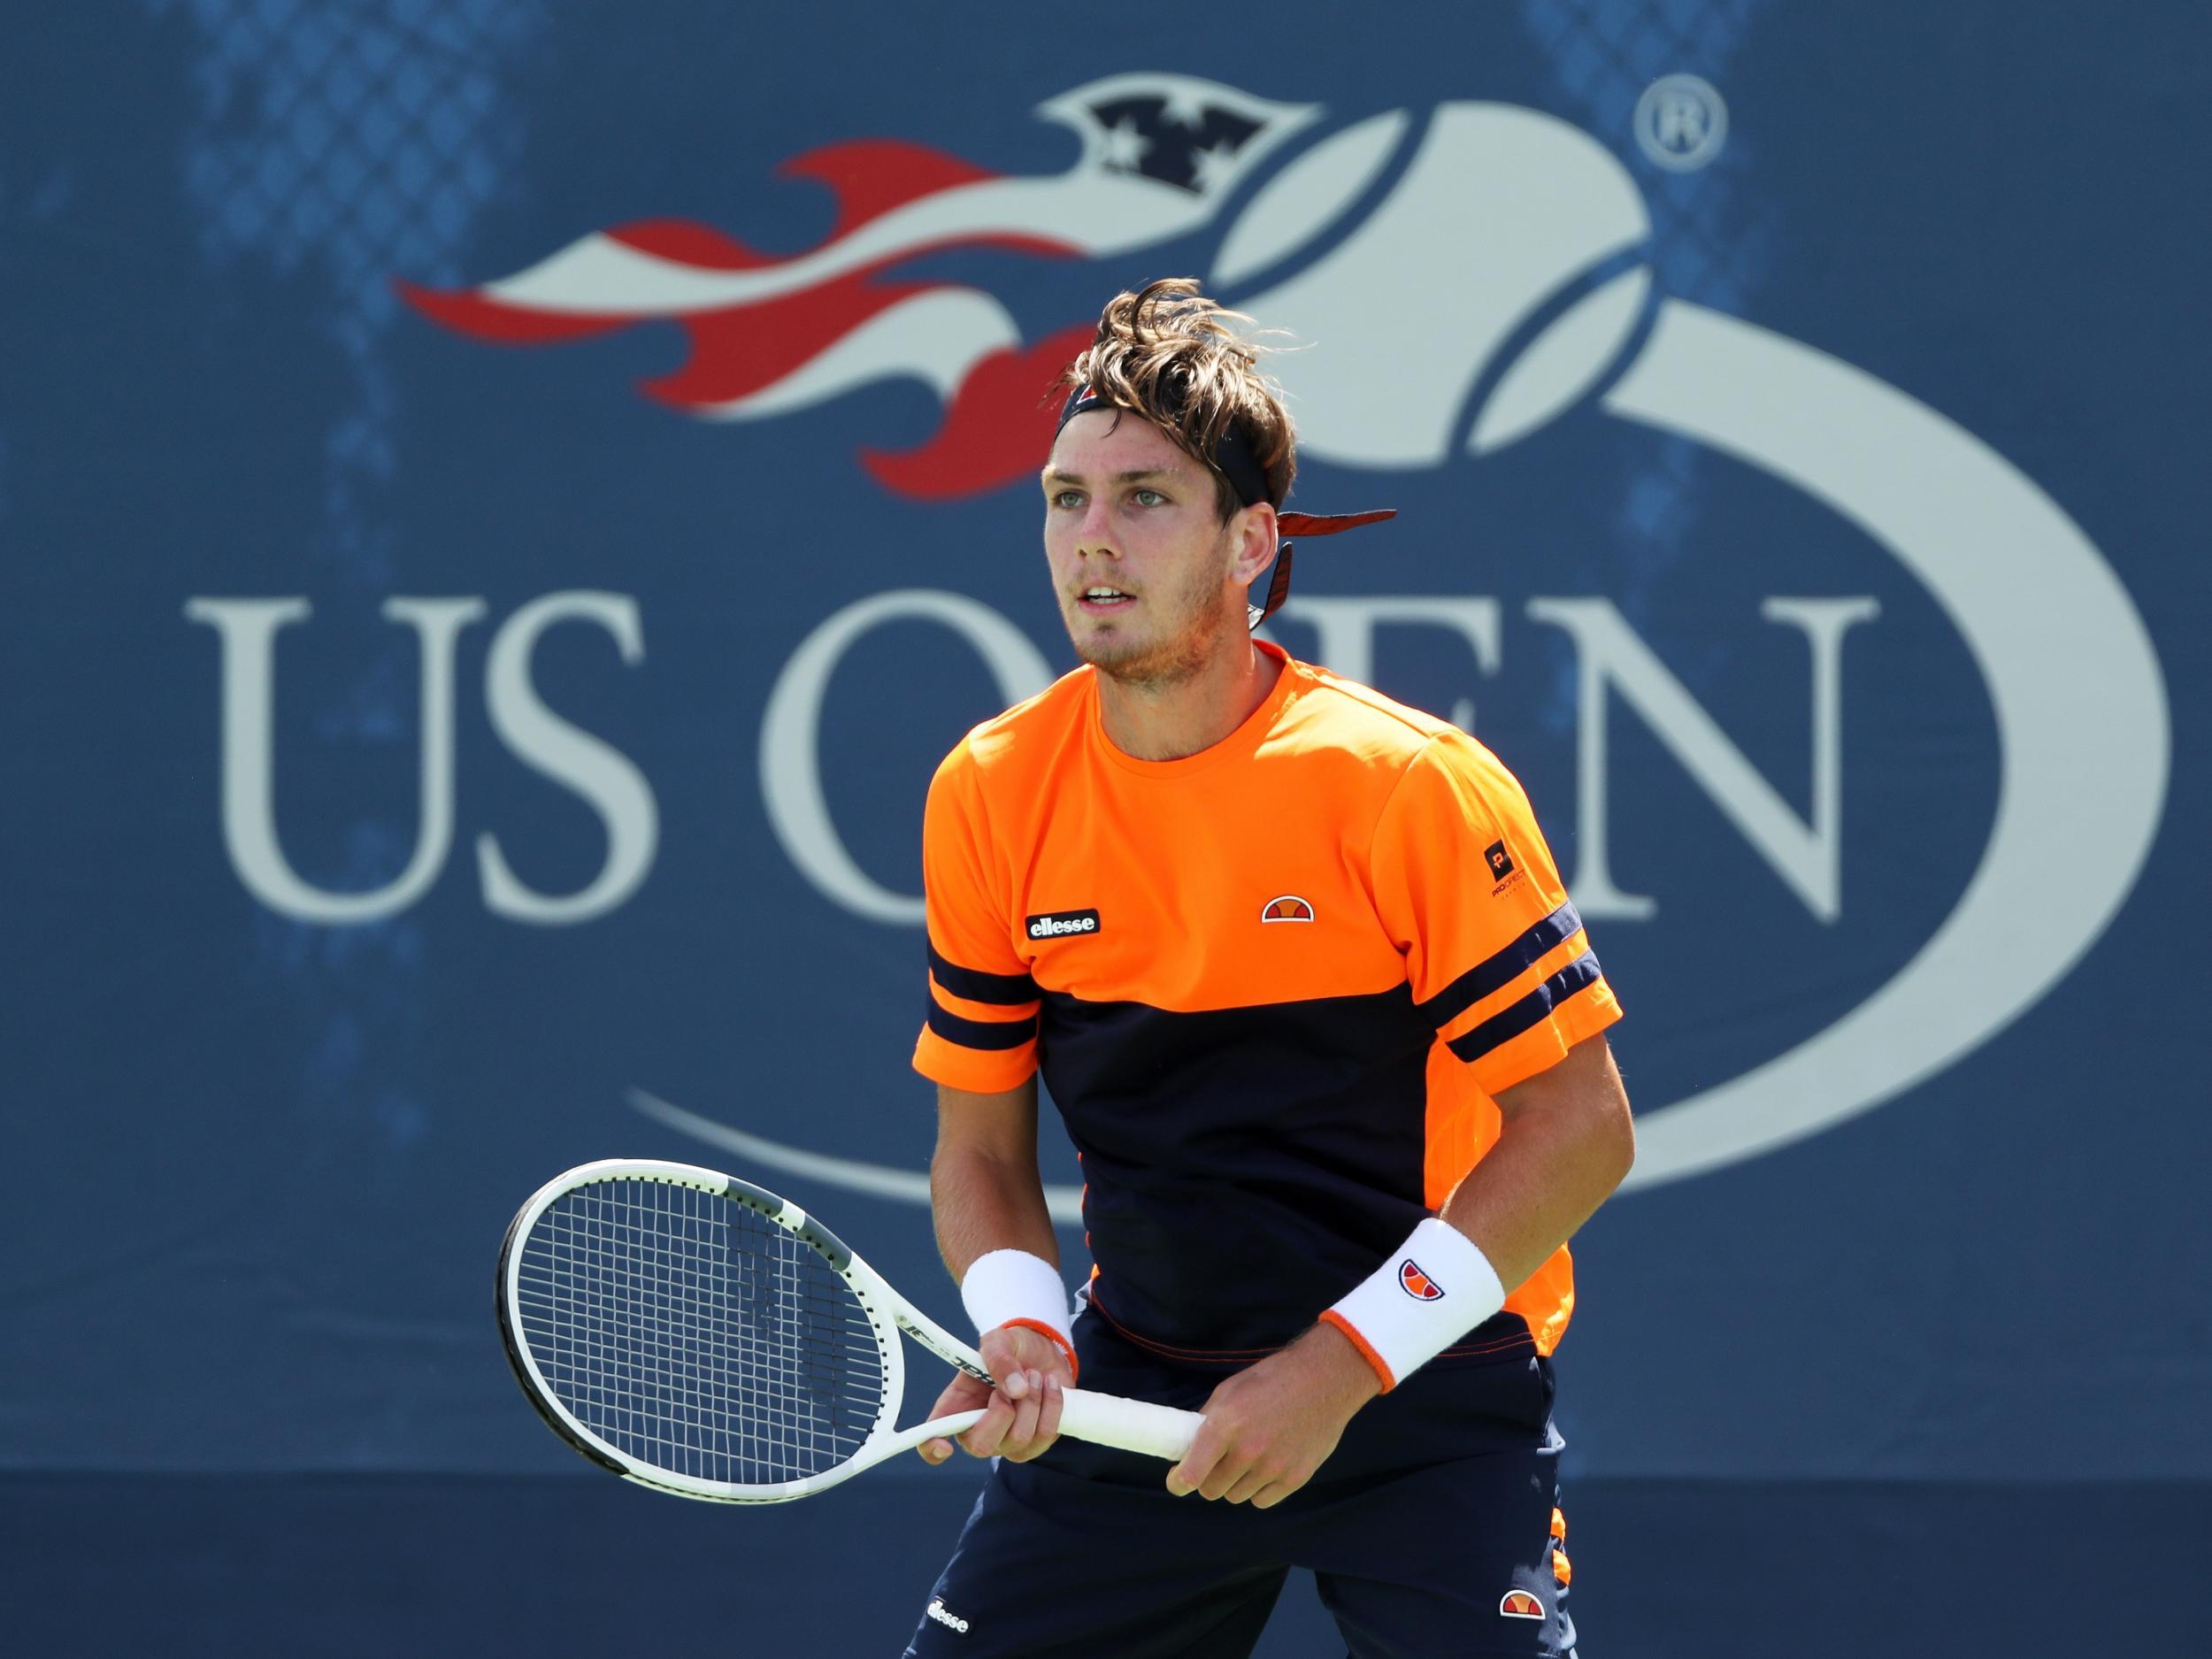 Cameron Norrie looks on during his first round victory over Dmitry Tursunov at the US Open